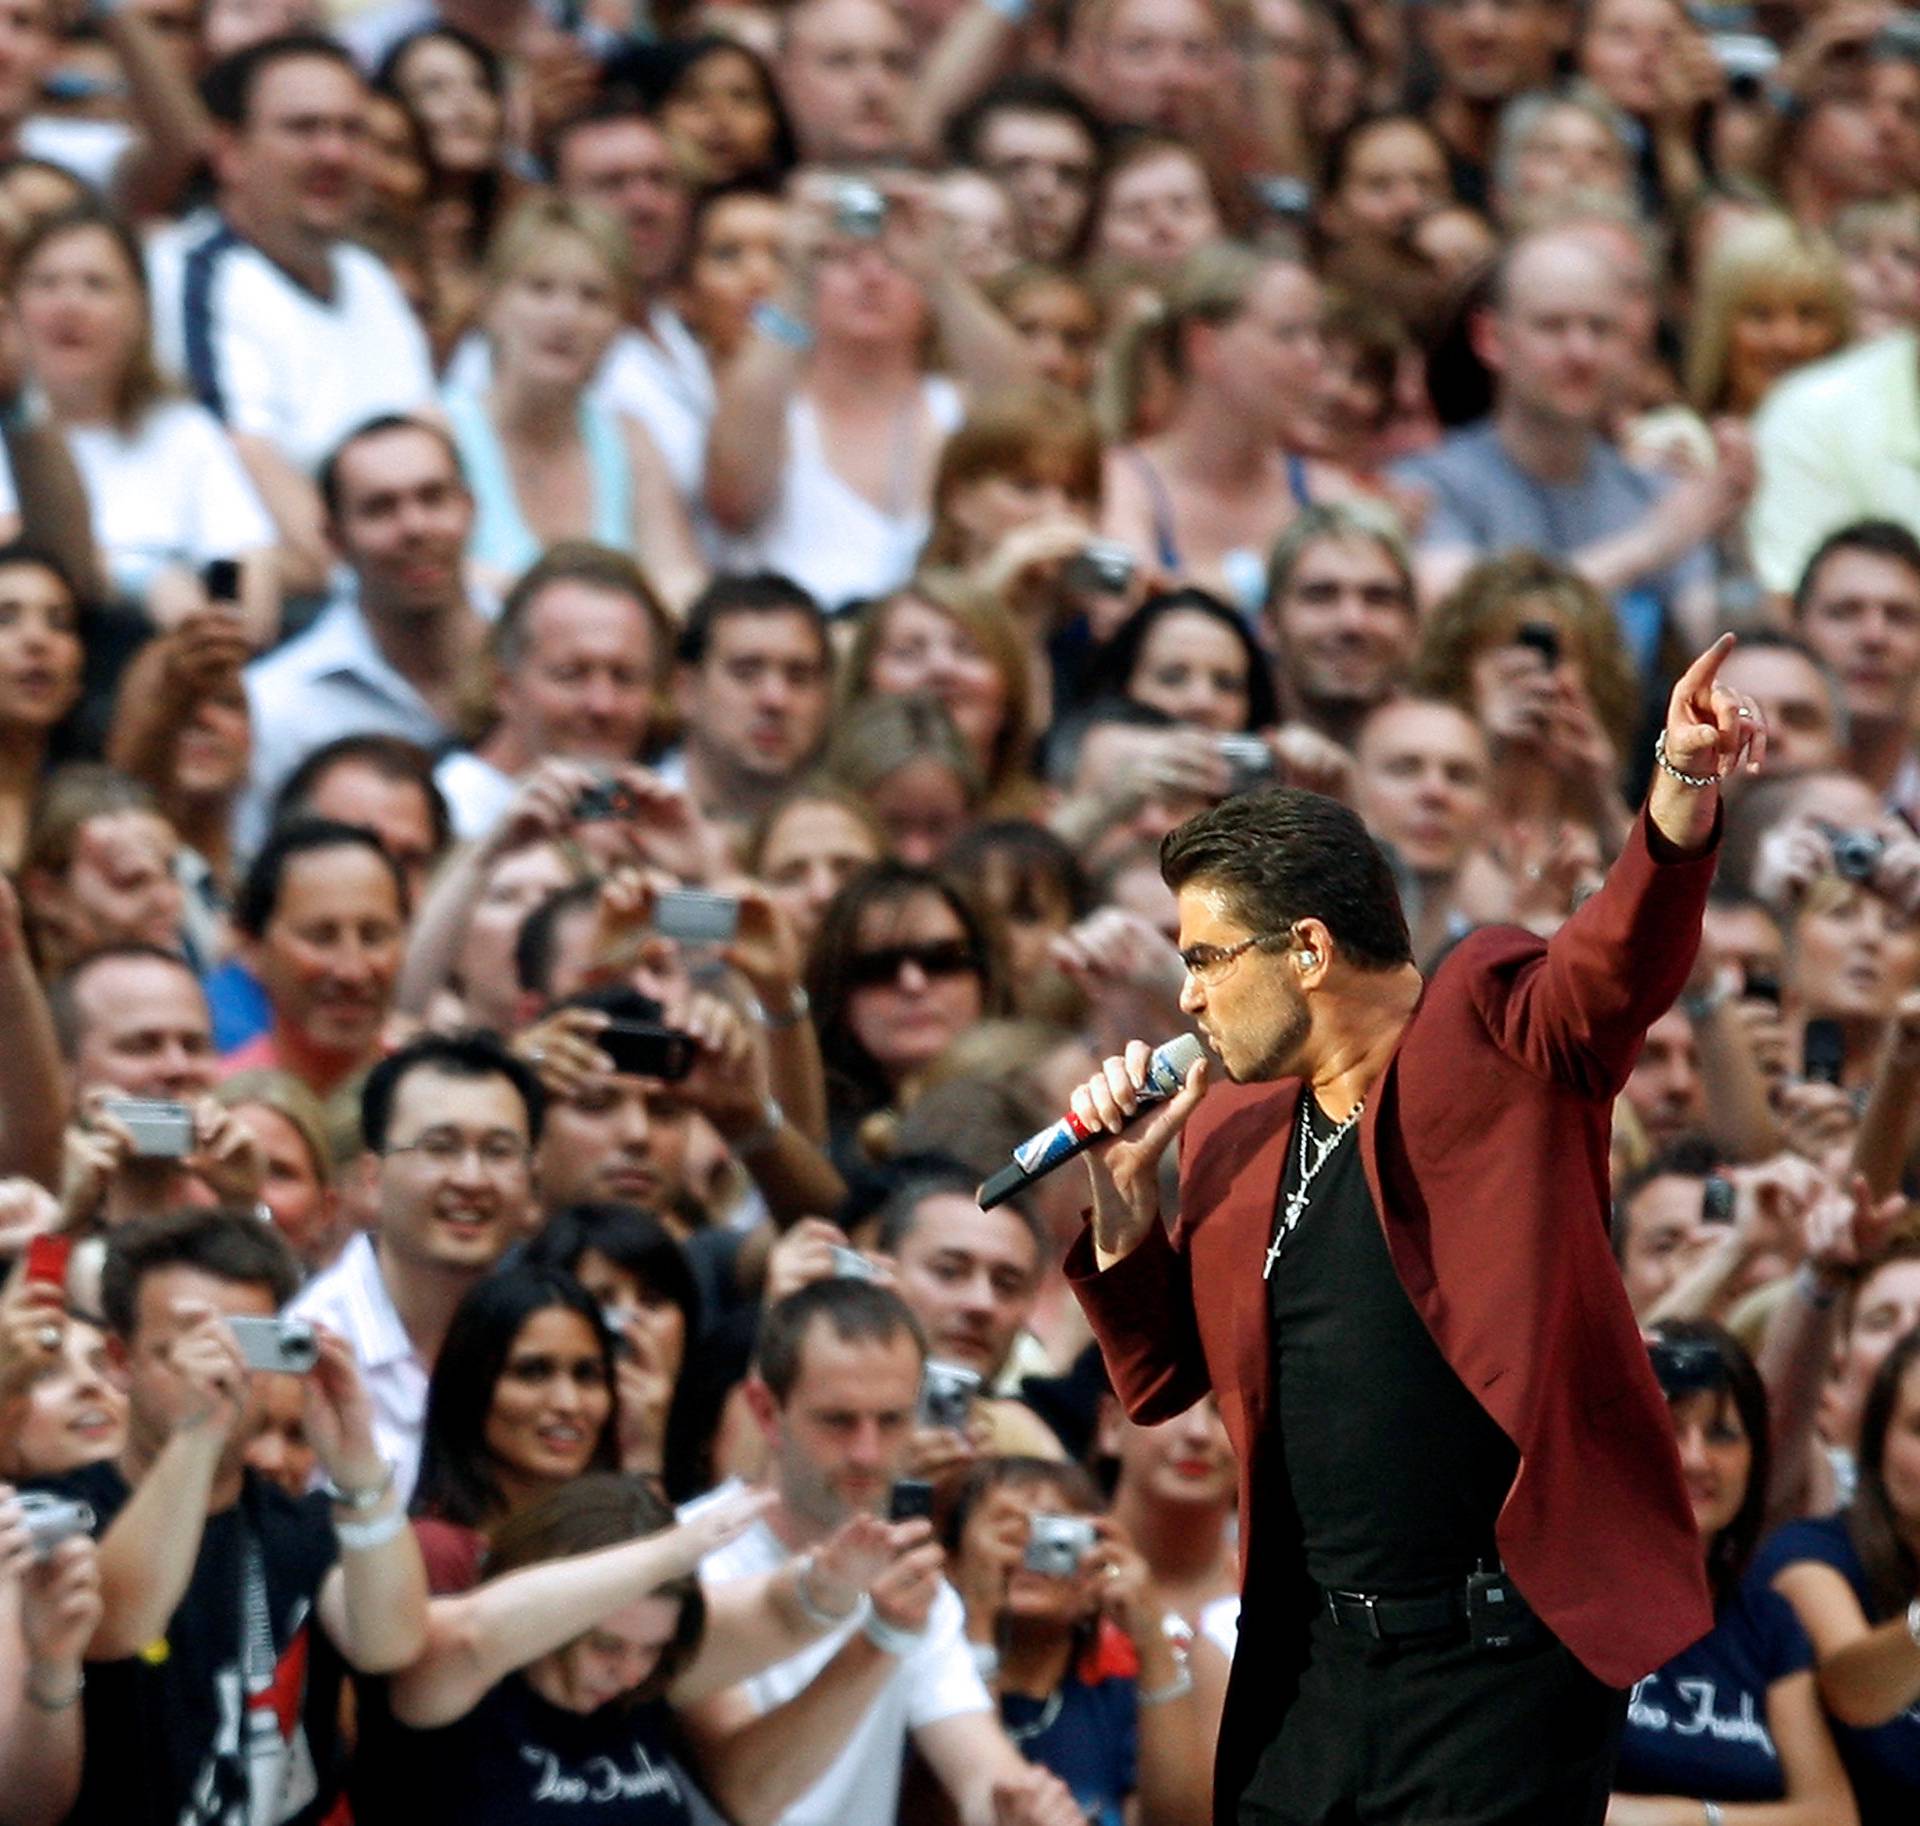 FILE PHOTO: British pop star George Michael performs during a concert at Wembley Stadium in London